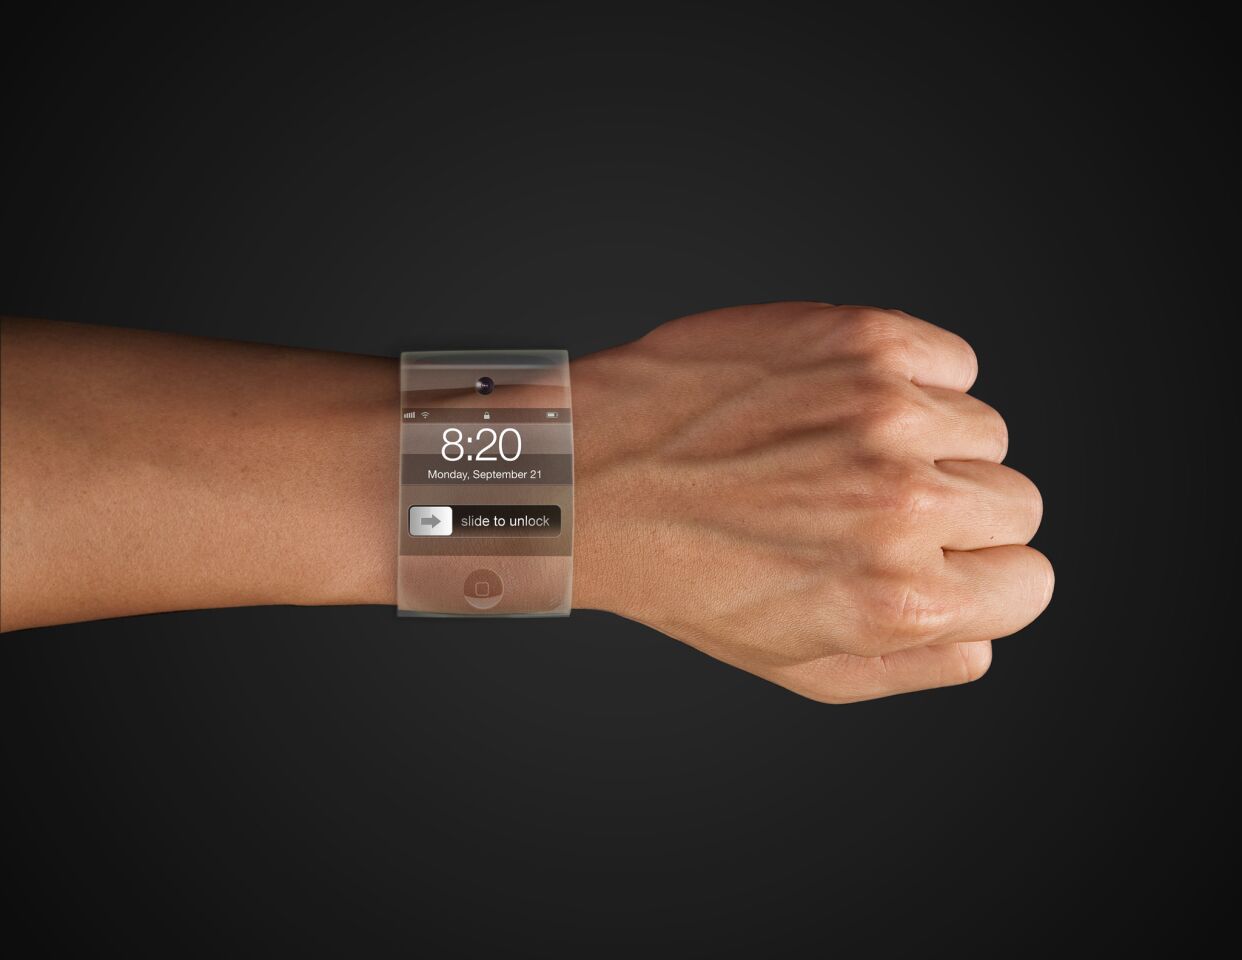 The iWatch, seen here in a concept design, is on our list for the second year in a row, and now we want it more than ever. We first heard reports of this mythical item in late 2012, which left us intrigued about what could come in 2013. But the year came and went without a single wearable gadget from Apple. Instead, we had to make do with countless iWatch rumors as Google, Samsung and others released wearable gadgets of their own. That's left us hungrier than ever for the iWatch. If Apple truly has a Bluetooth smartwatch up its sleeves, the device needs to come out in 2014. Otherwise, people will stop believing in it the same way they no longer believe in the iTV.